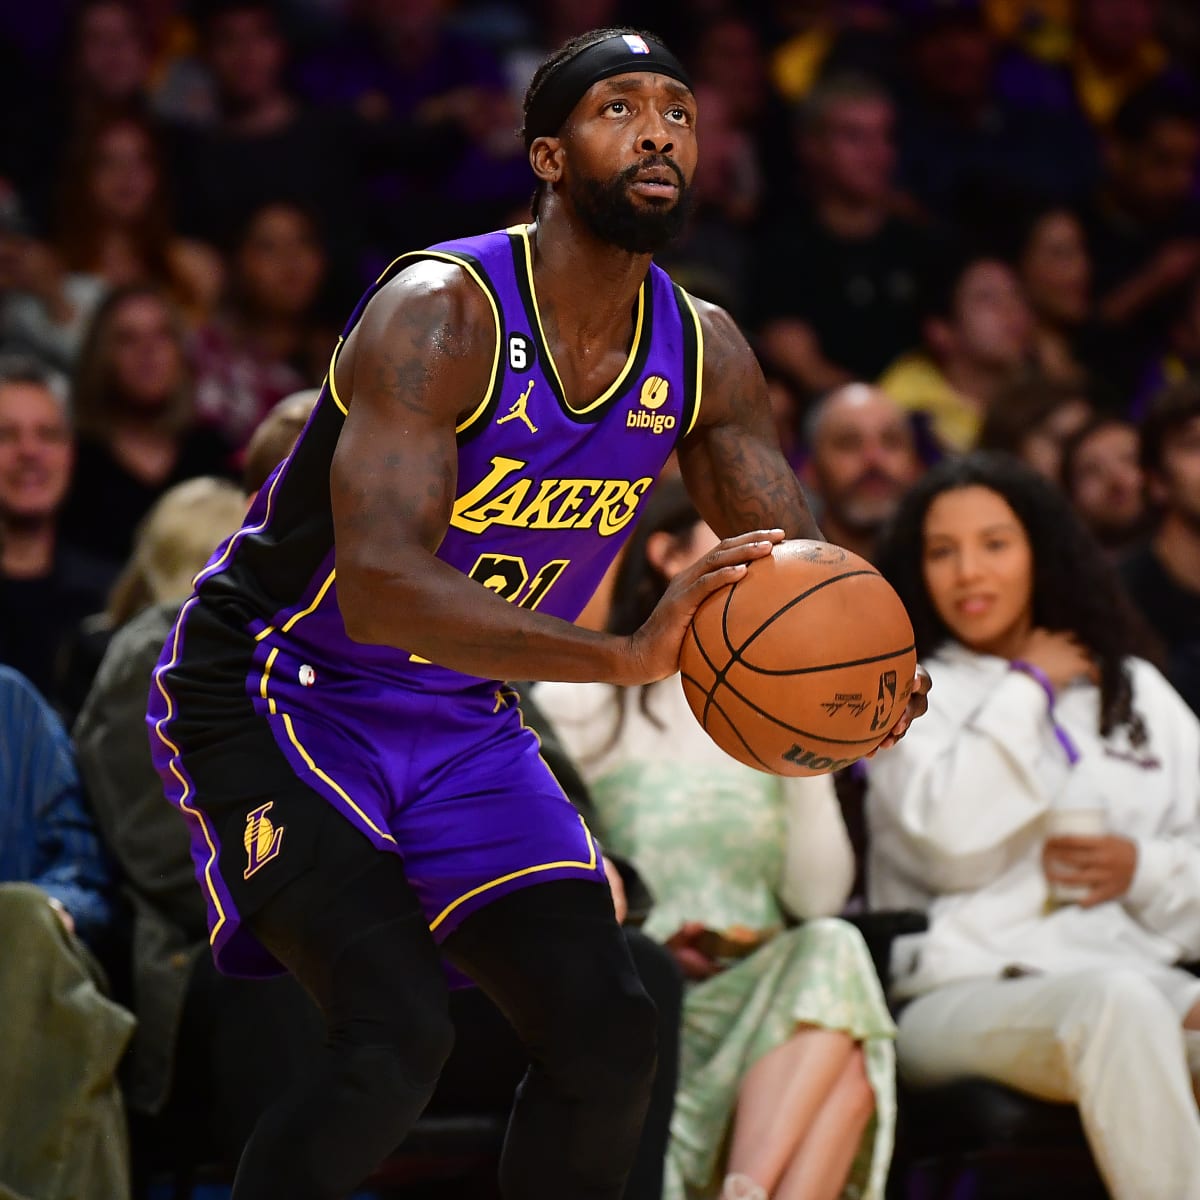 Los Angeles Lakers: Patrick Beverley is perfect for this team